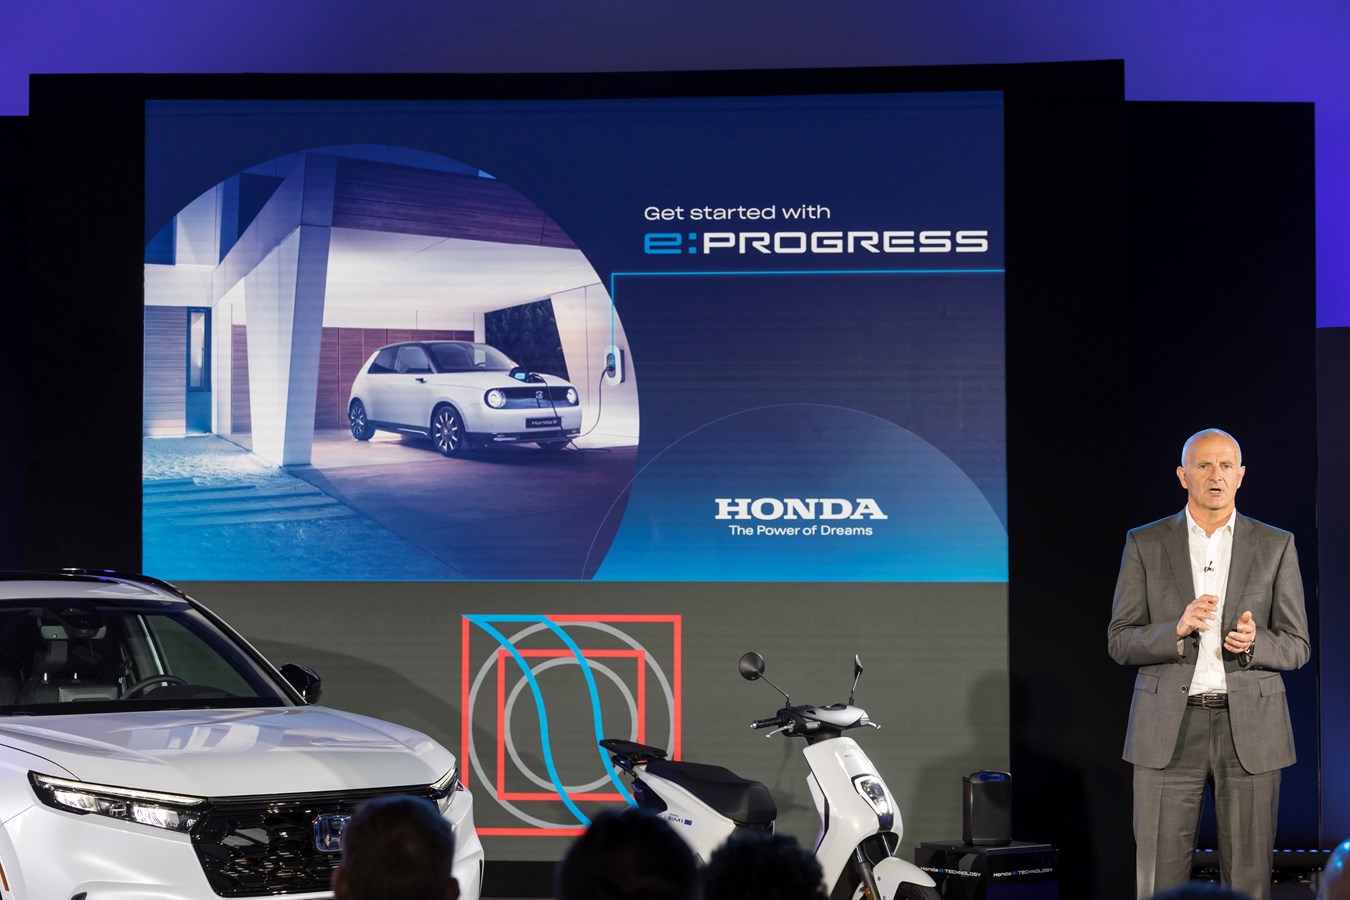 438849_HONDA_SHOWCASES_AMBITIOUS_NEW_RANGE_OF_ELECTRIFIED_PRODUCTS_AND_SERVICES.jpg